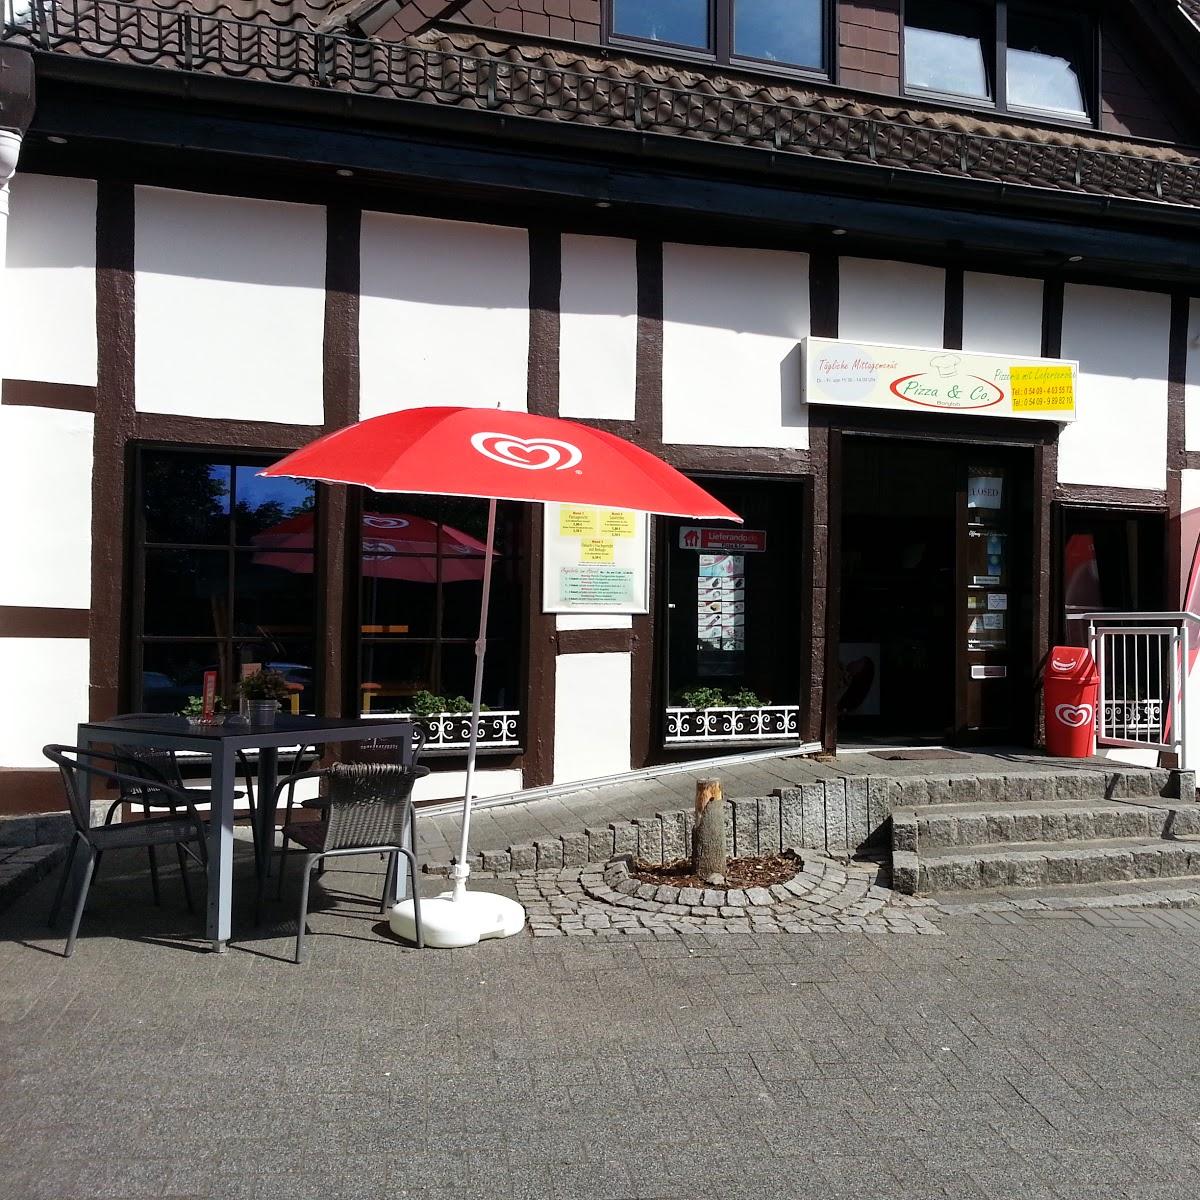 Restaurant "Pizza & Co. Lieferservice" in Hilter am Teutoburger Wald